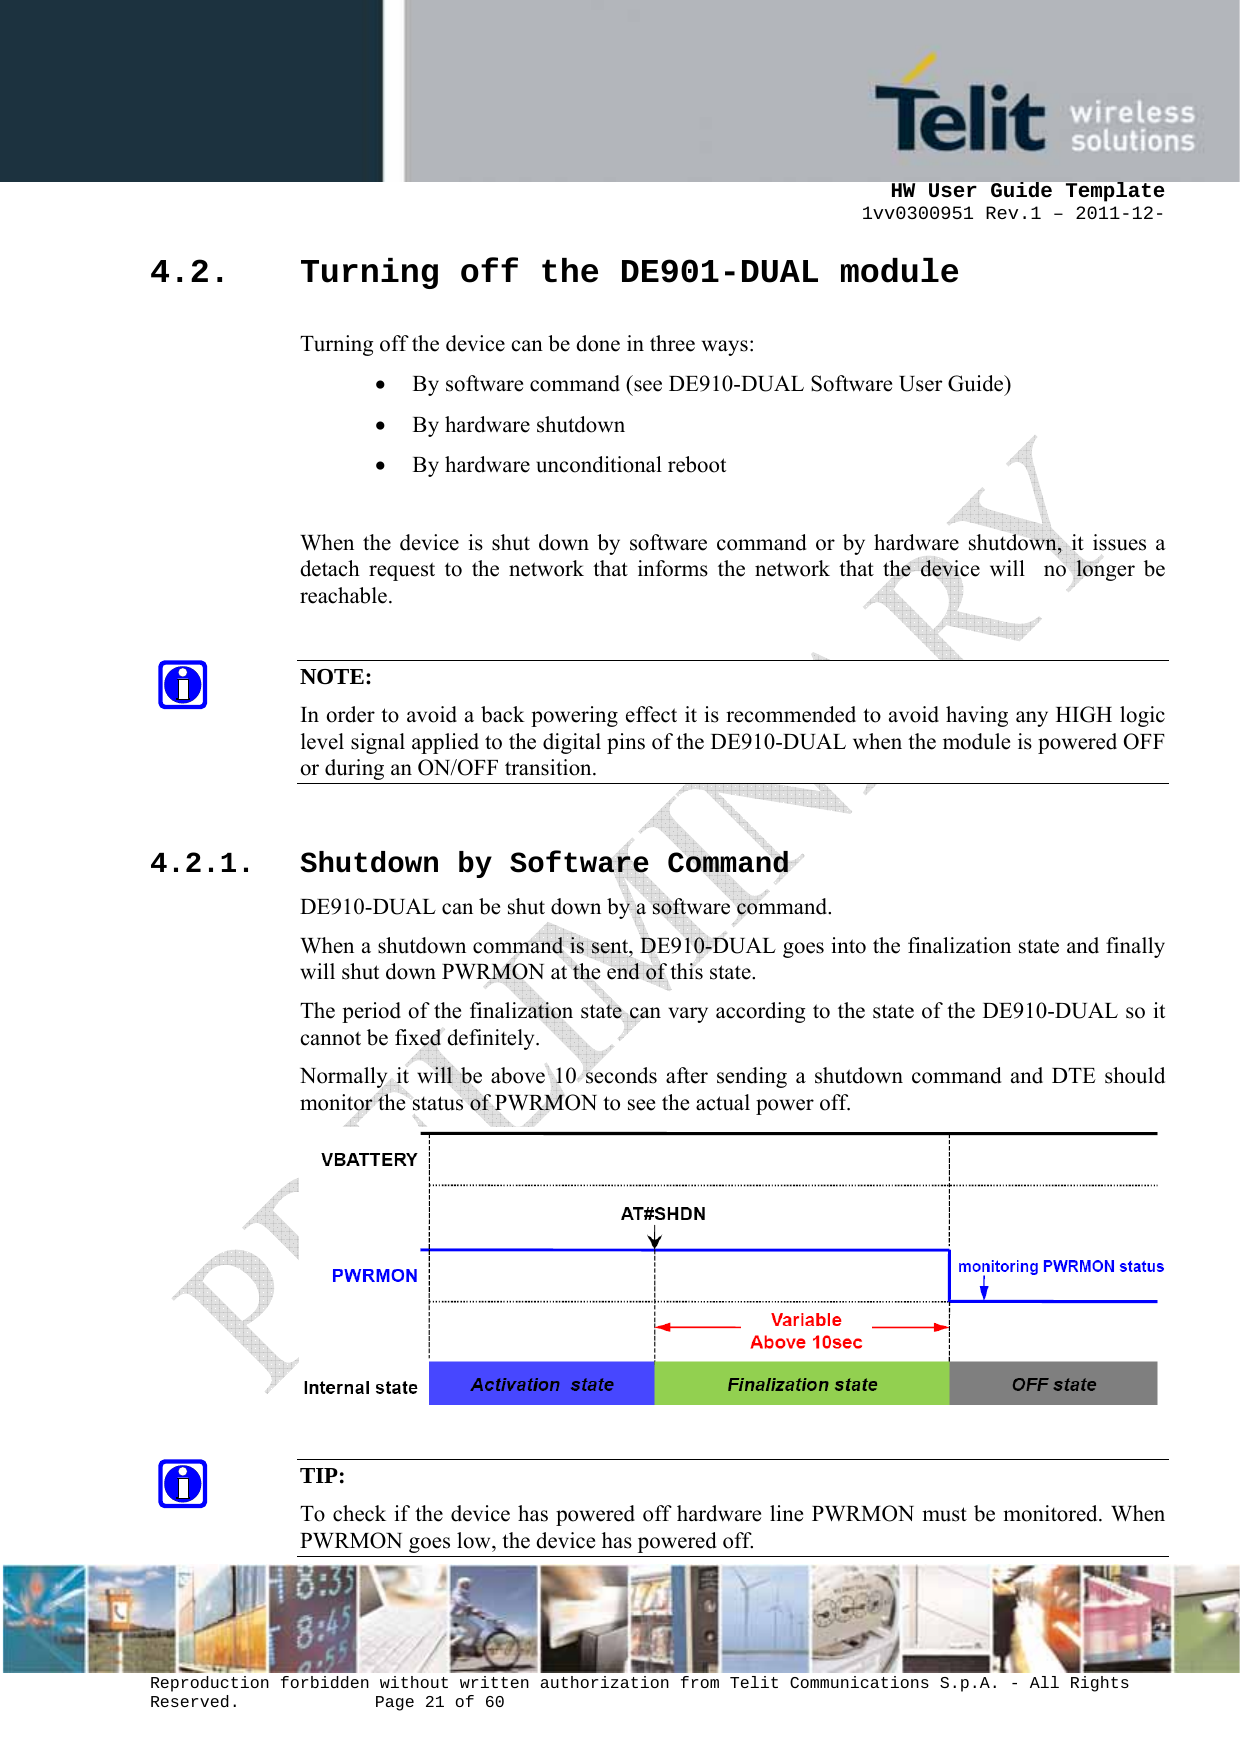      HW User Guide Template 1vv0300951 Rev.1 – 2011-12-  Reproduction forbidden without written authorization from Telit Communications S.p.A. - All Rights Reserved.    Page 21 of 60                                                     4.2. Turning off the DE901-DUAL module Turning off the device can be done in three ways: • By software command (see DE910-DUAL Software User Guide) • By hardware shutdown • By hardware unconditional reboot  When the device is shut down by software command or by hardware shutdown, it issues a detach request to the network that informs the network that the device will  no longer be reachable.  NOTE: In order to avoid a back powering effect it is recommended to avoid having any HIGH logic level signal applied to the digital pins of the DE910-DUAL when the module is powered OFF or during an ON/OFF transition.  4.2.1. Shutdown by Software Command DE910-DUAL can be shut down by a software command. When a shutdown command is sent, DE910-DUAL goes into the finalization state and finally will shut down PWRMON at the end of this state. The period of the finalization state can vary according to the state of the DE910-DUAL so it cannot be fixed definitely. Normally it will be above 10 seconds after sending a shutdown command and DTE should monitor the status of PWRMON to see the actual power off.   TIP: To check if the device has powered off hardware line PWRMON must be monitored. When PWRMON goes low, the device has powered off. 